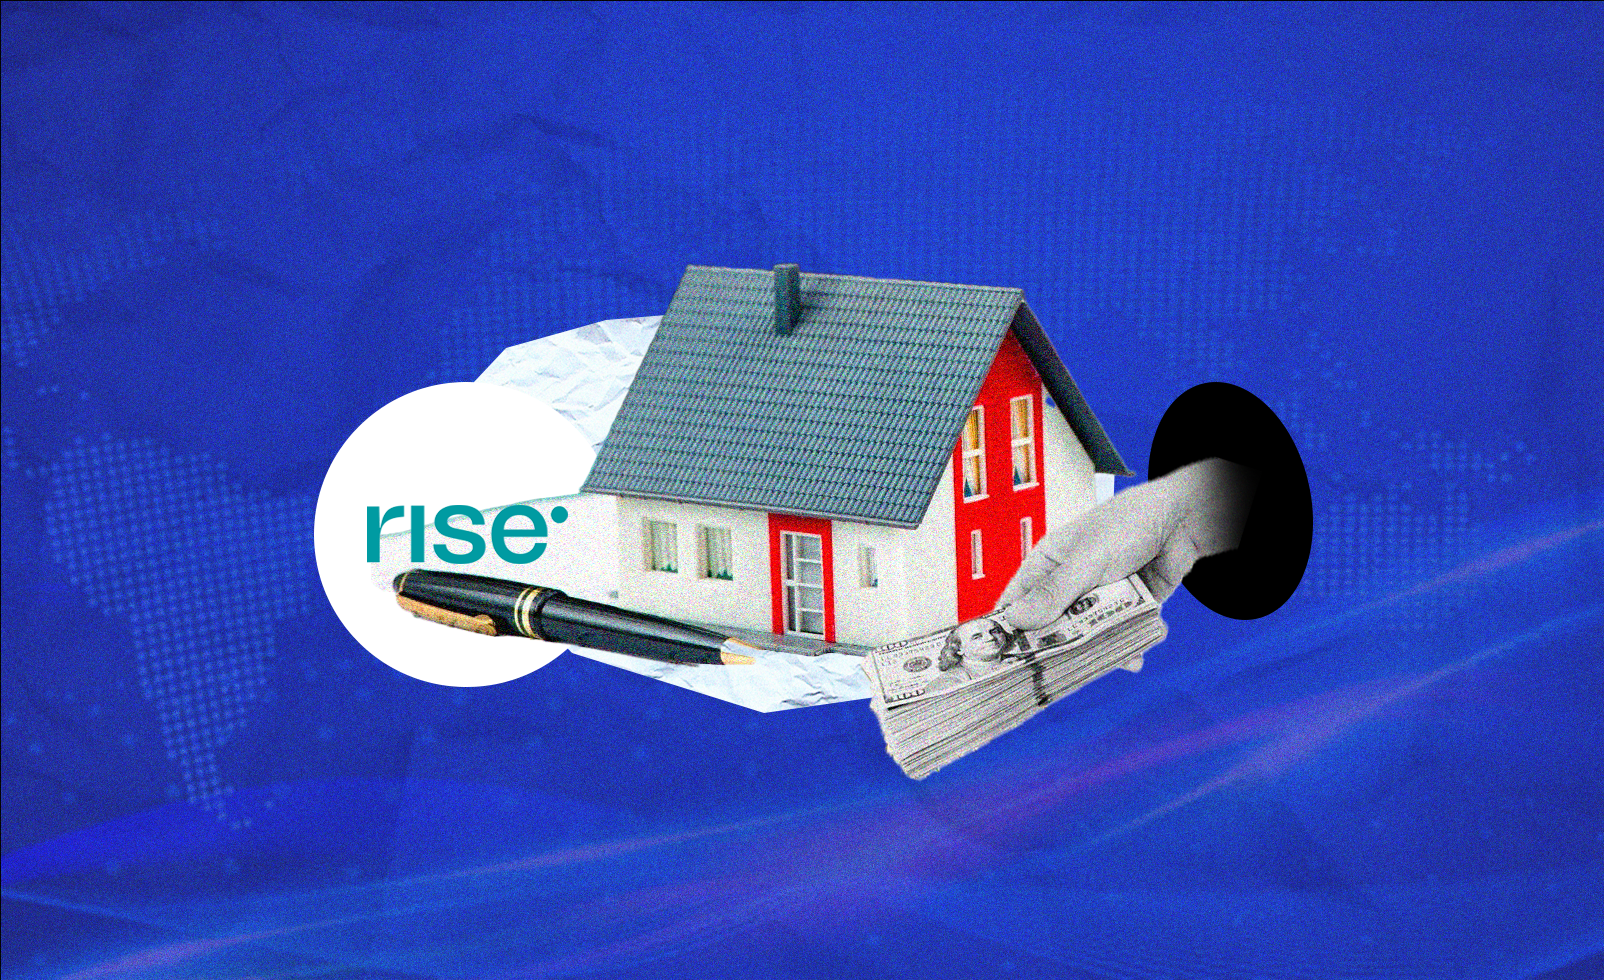 With Risevest&#8217;s &#8220;Managed By Rise&#8221;, Users Can Now Own Property in the United States